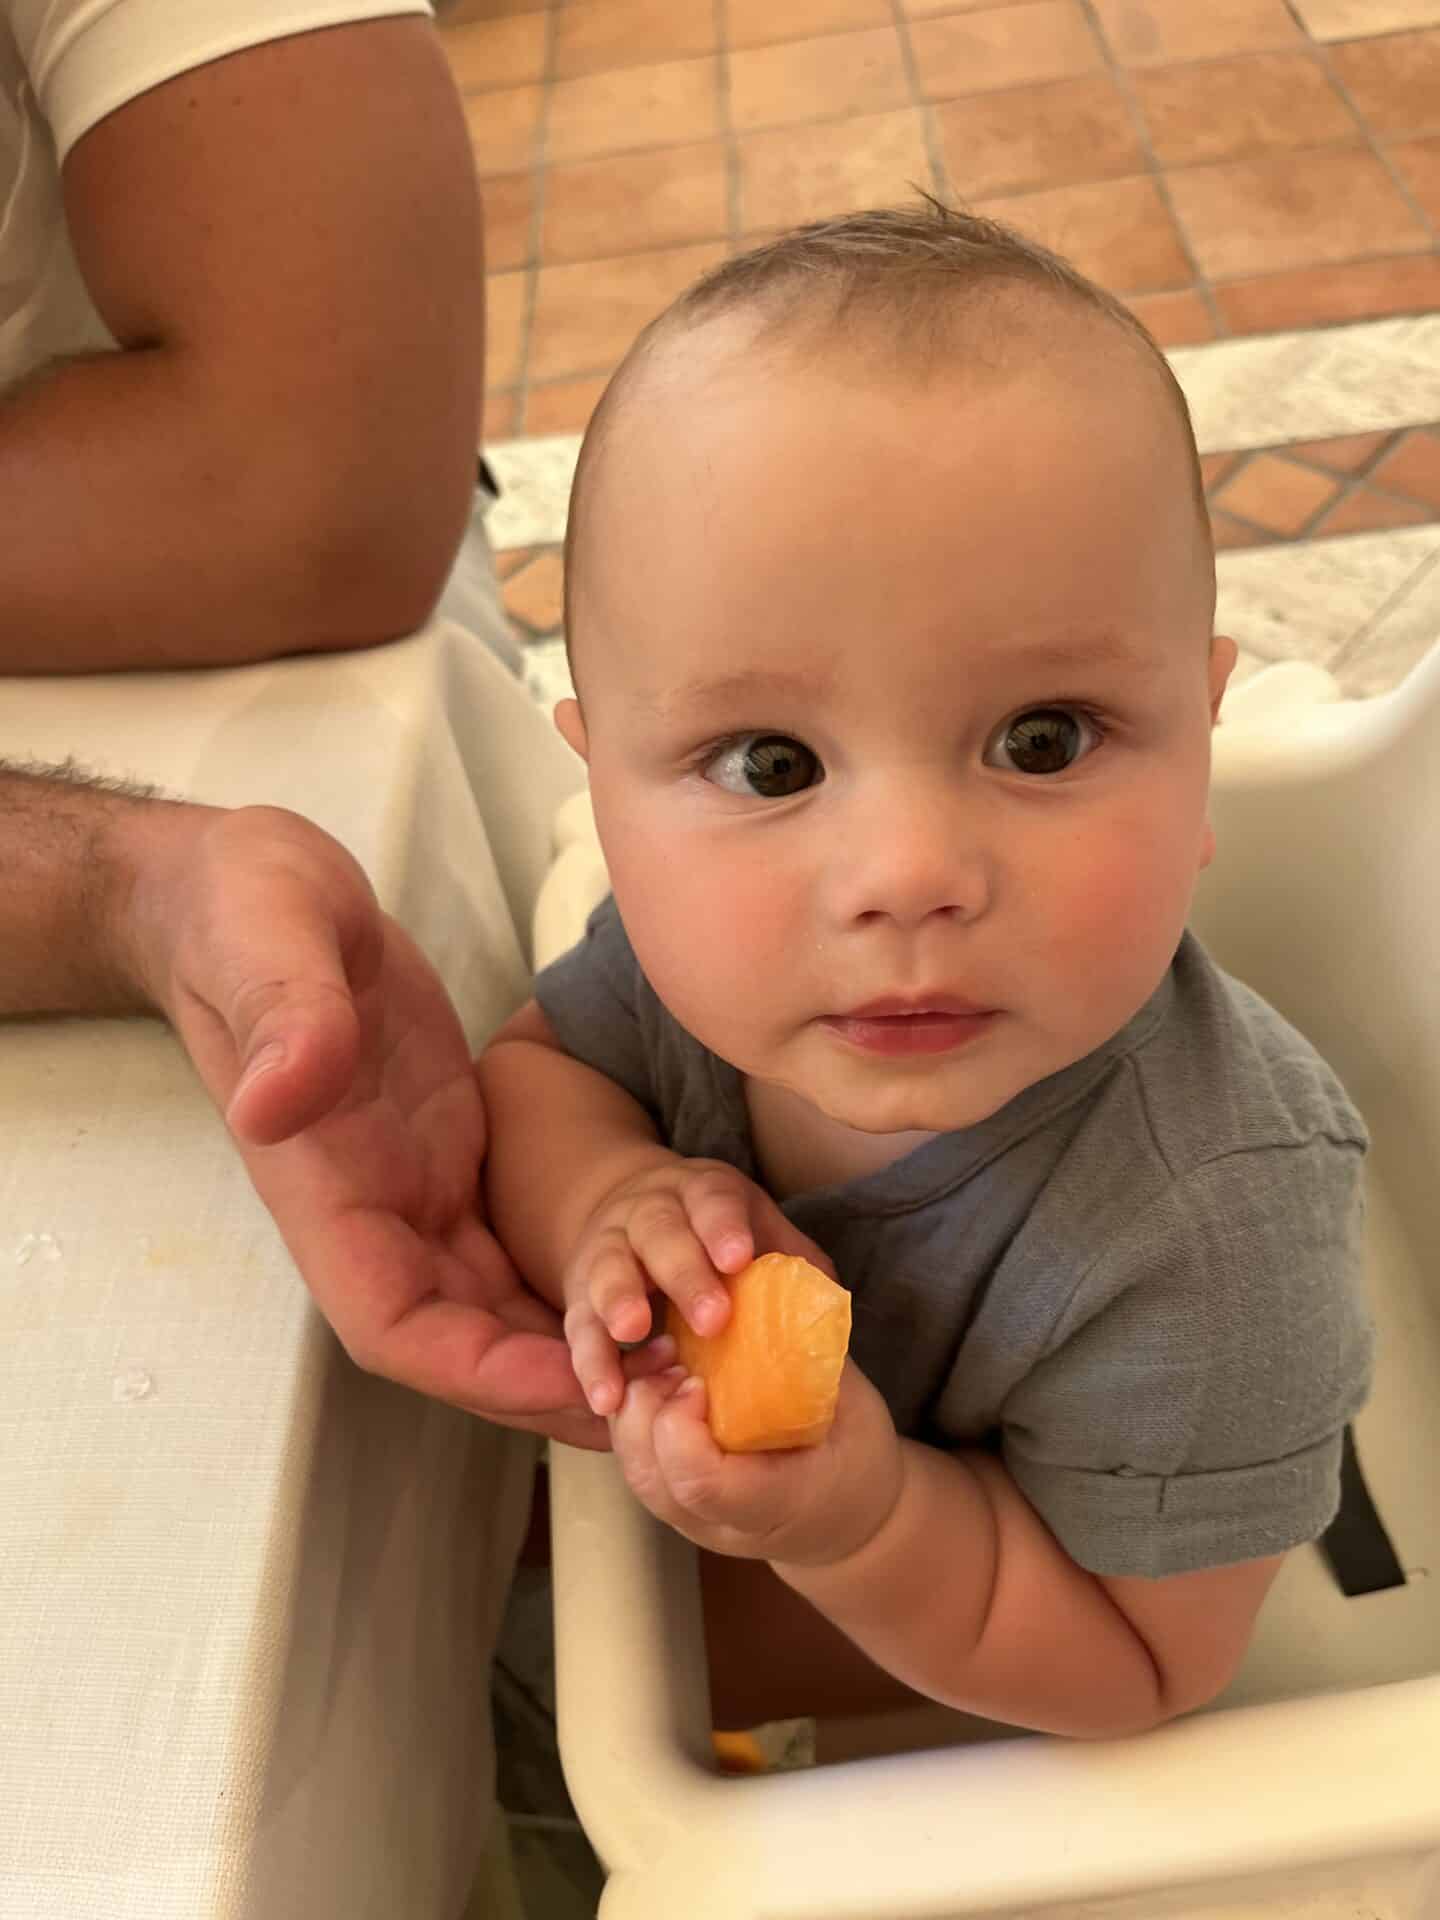 six month old baby in a highchair eating a melon